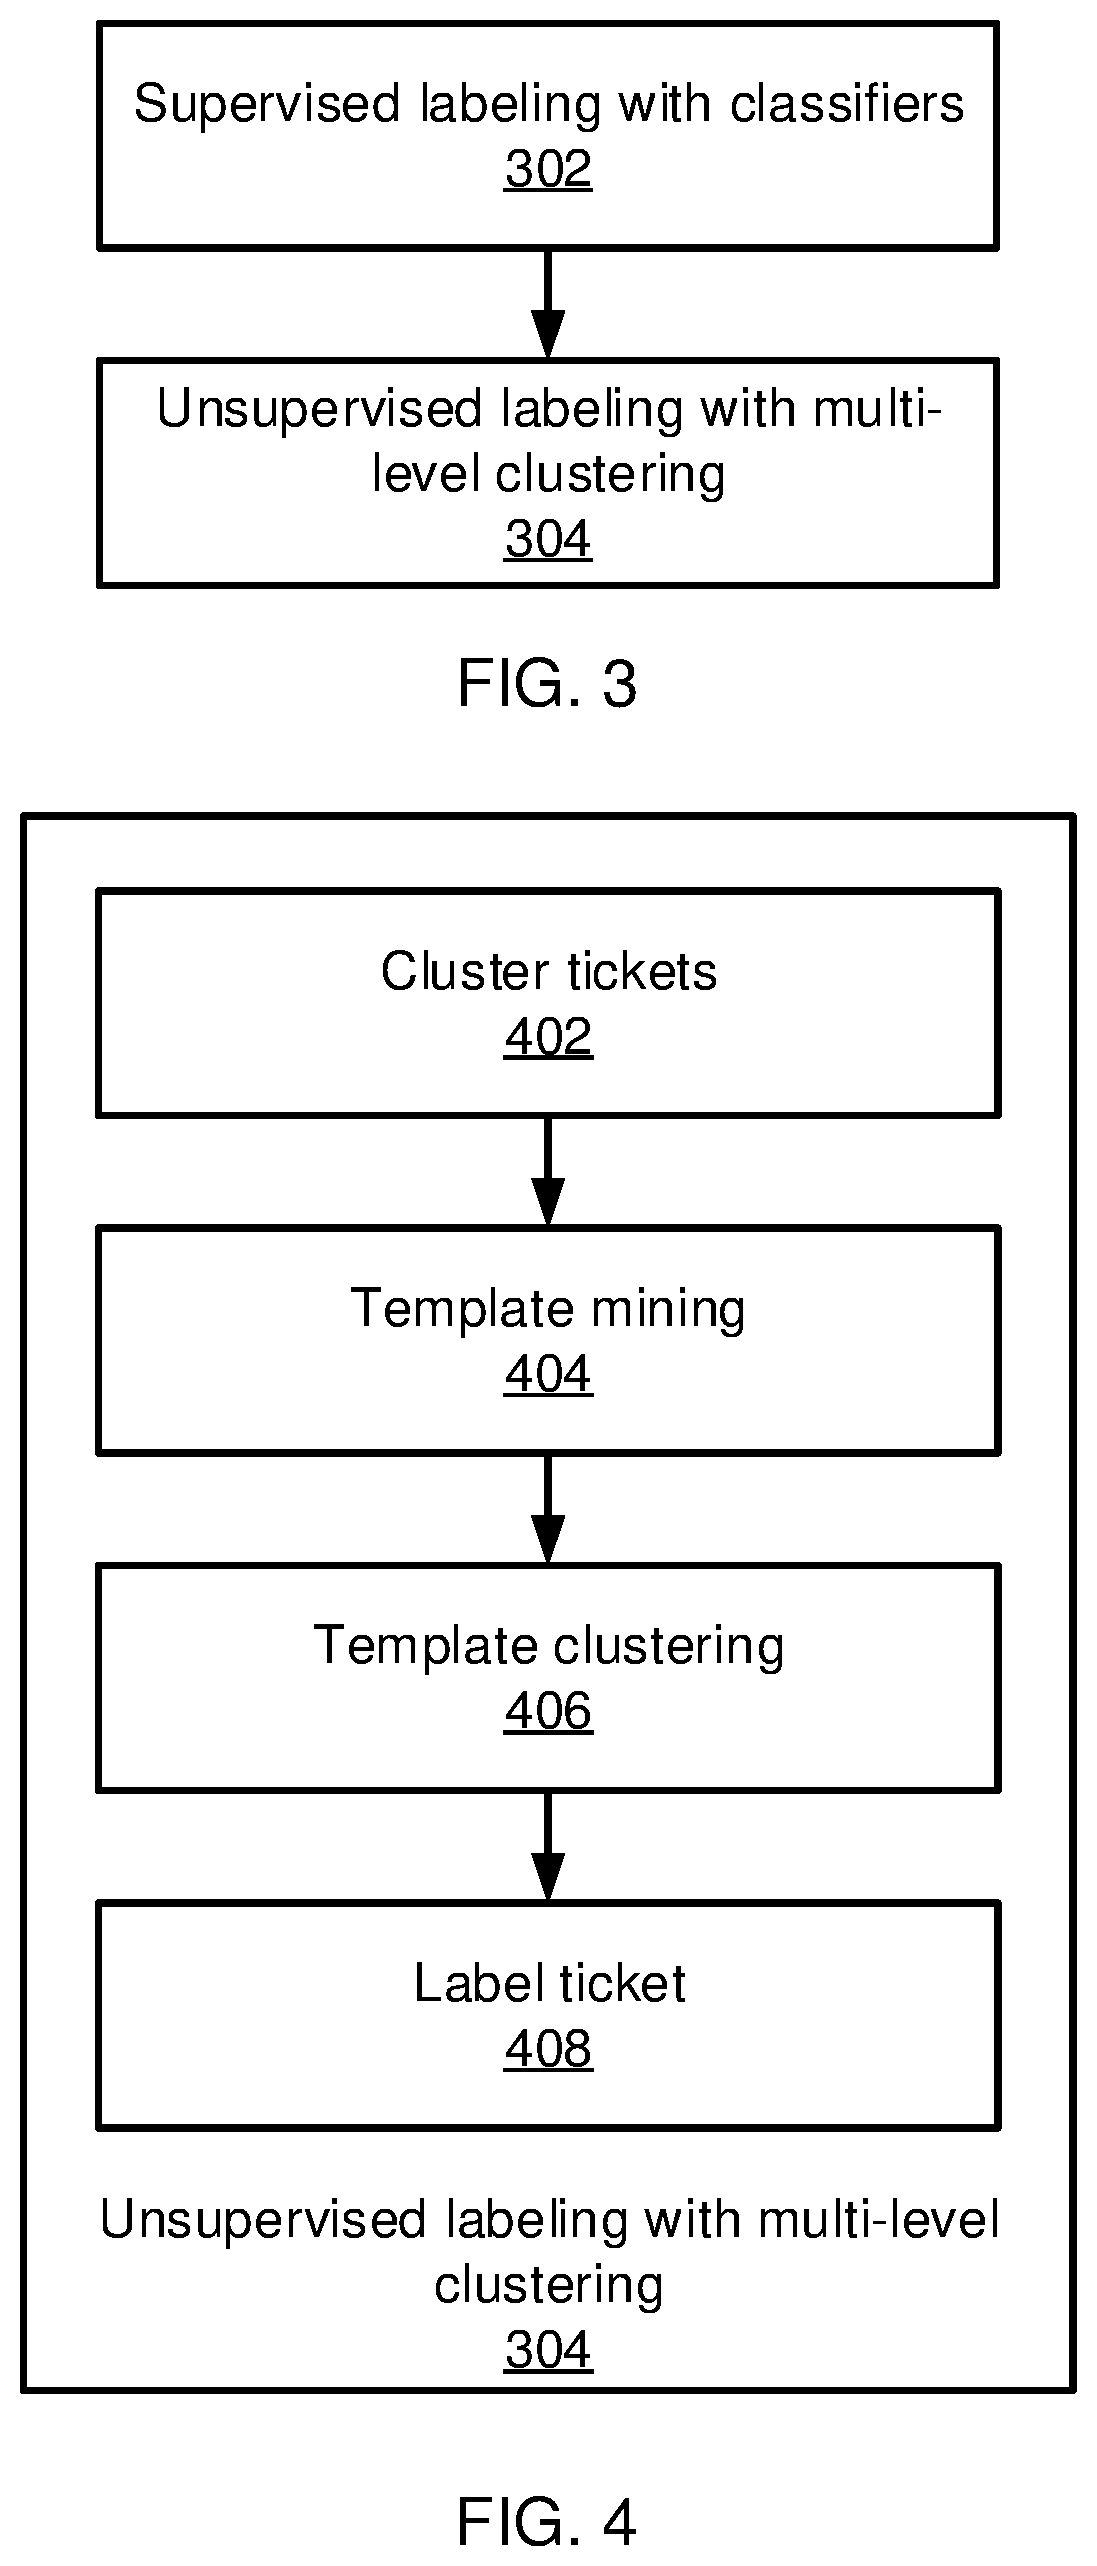 Hybrid learning-based ticket classification and response